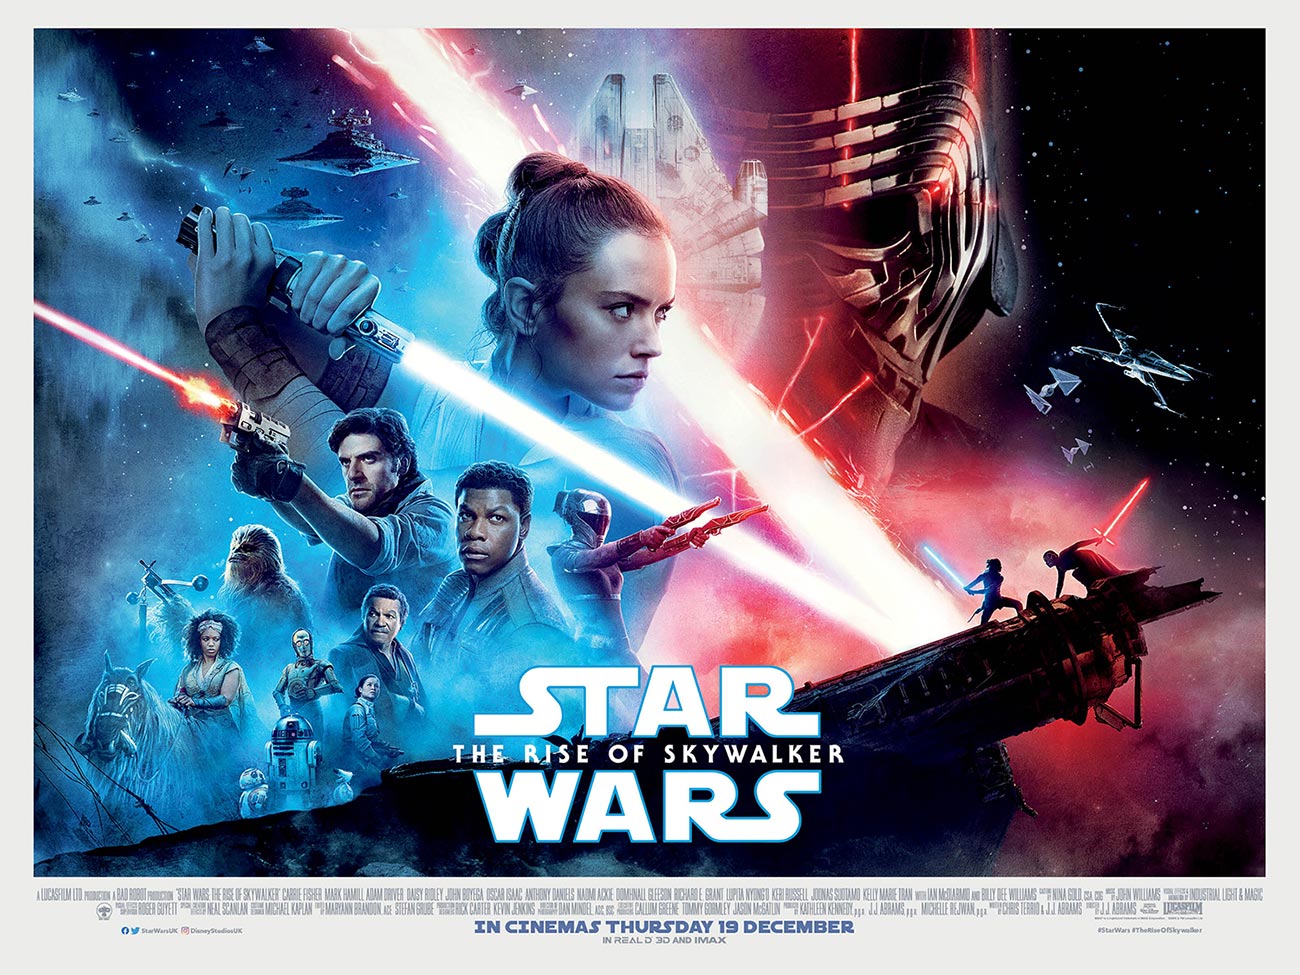  Star Wars - Sequels 3 Film Collection (The Force Awakens/The  Last Jedi/The Rise of Skywalker) [Blu-ray] : Adam Driver, Daisy Ridley,  Carrie Fisher, John Boyega, J.J. Abrams, Rian Johnson: Movies 